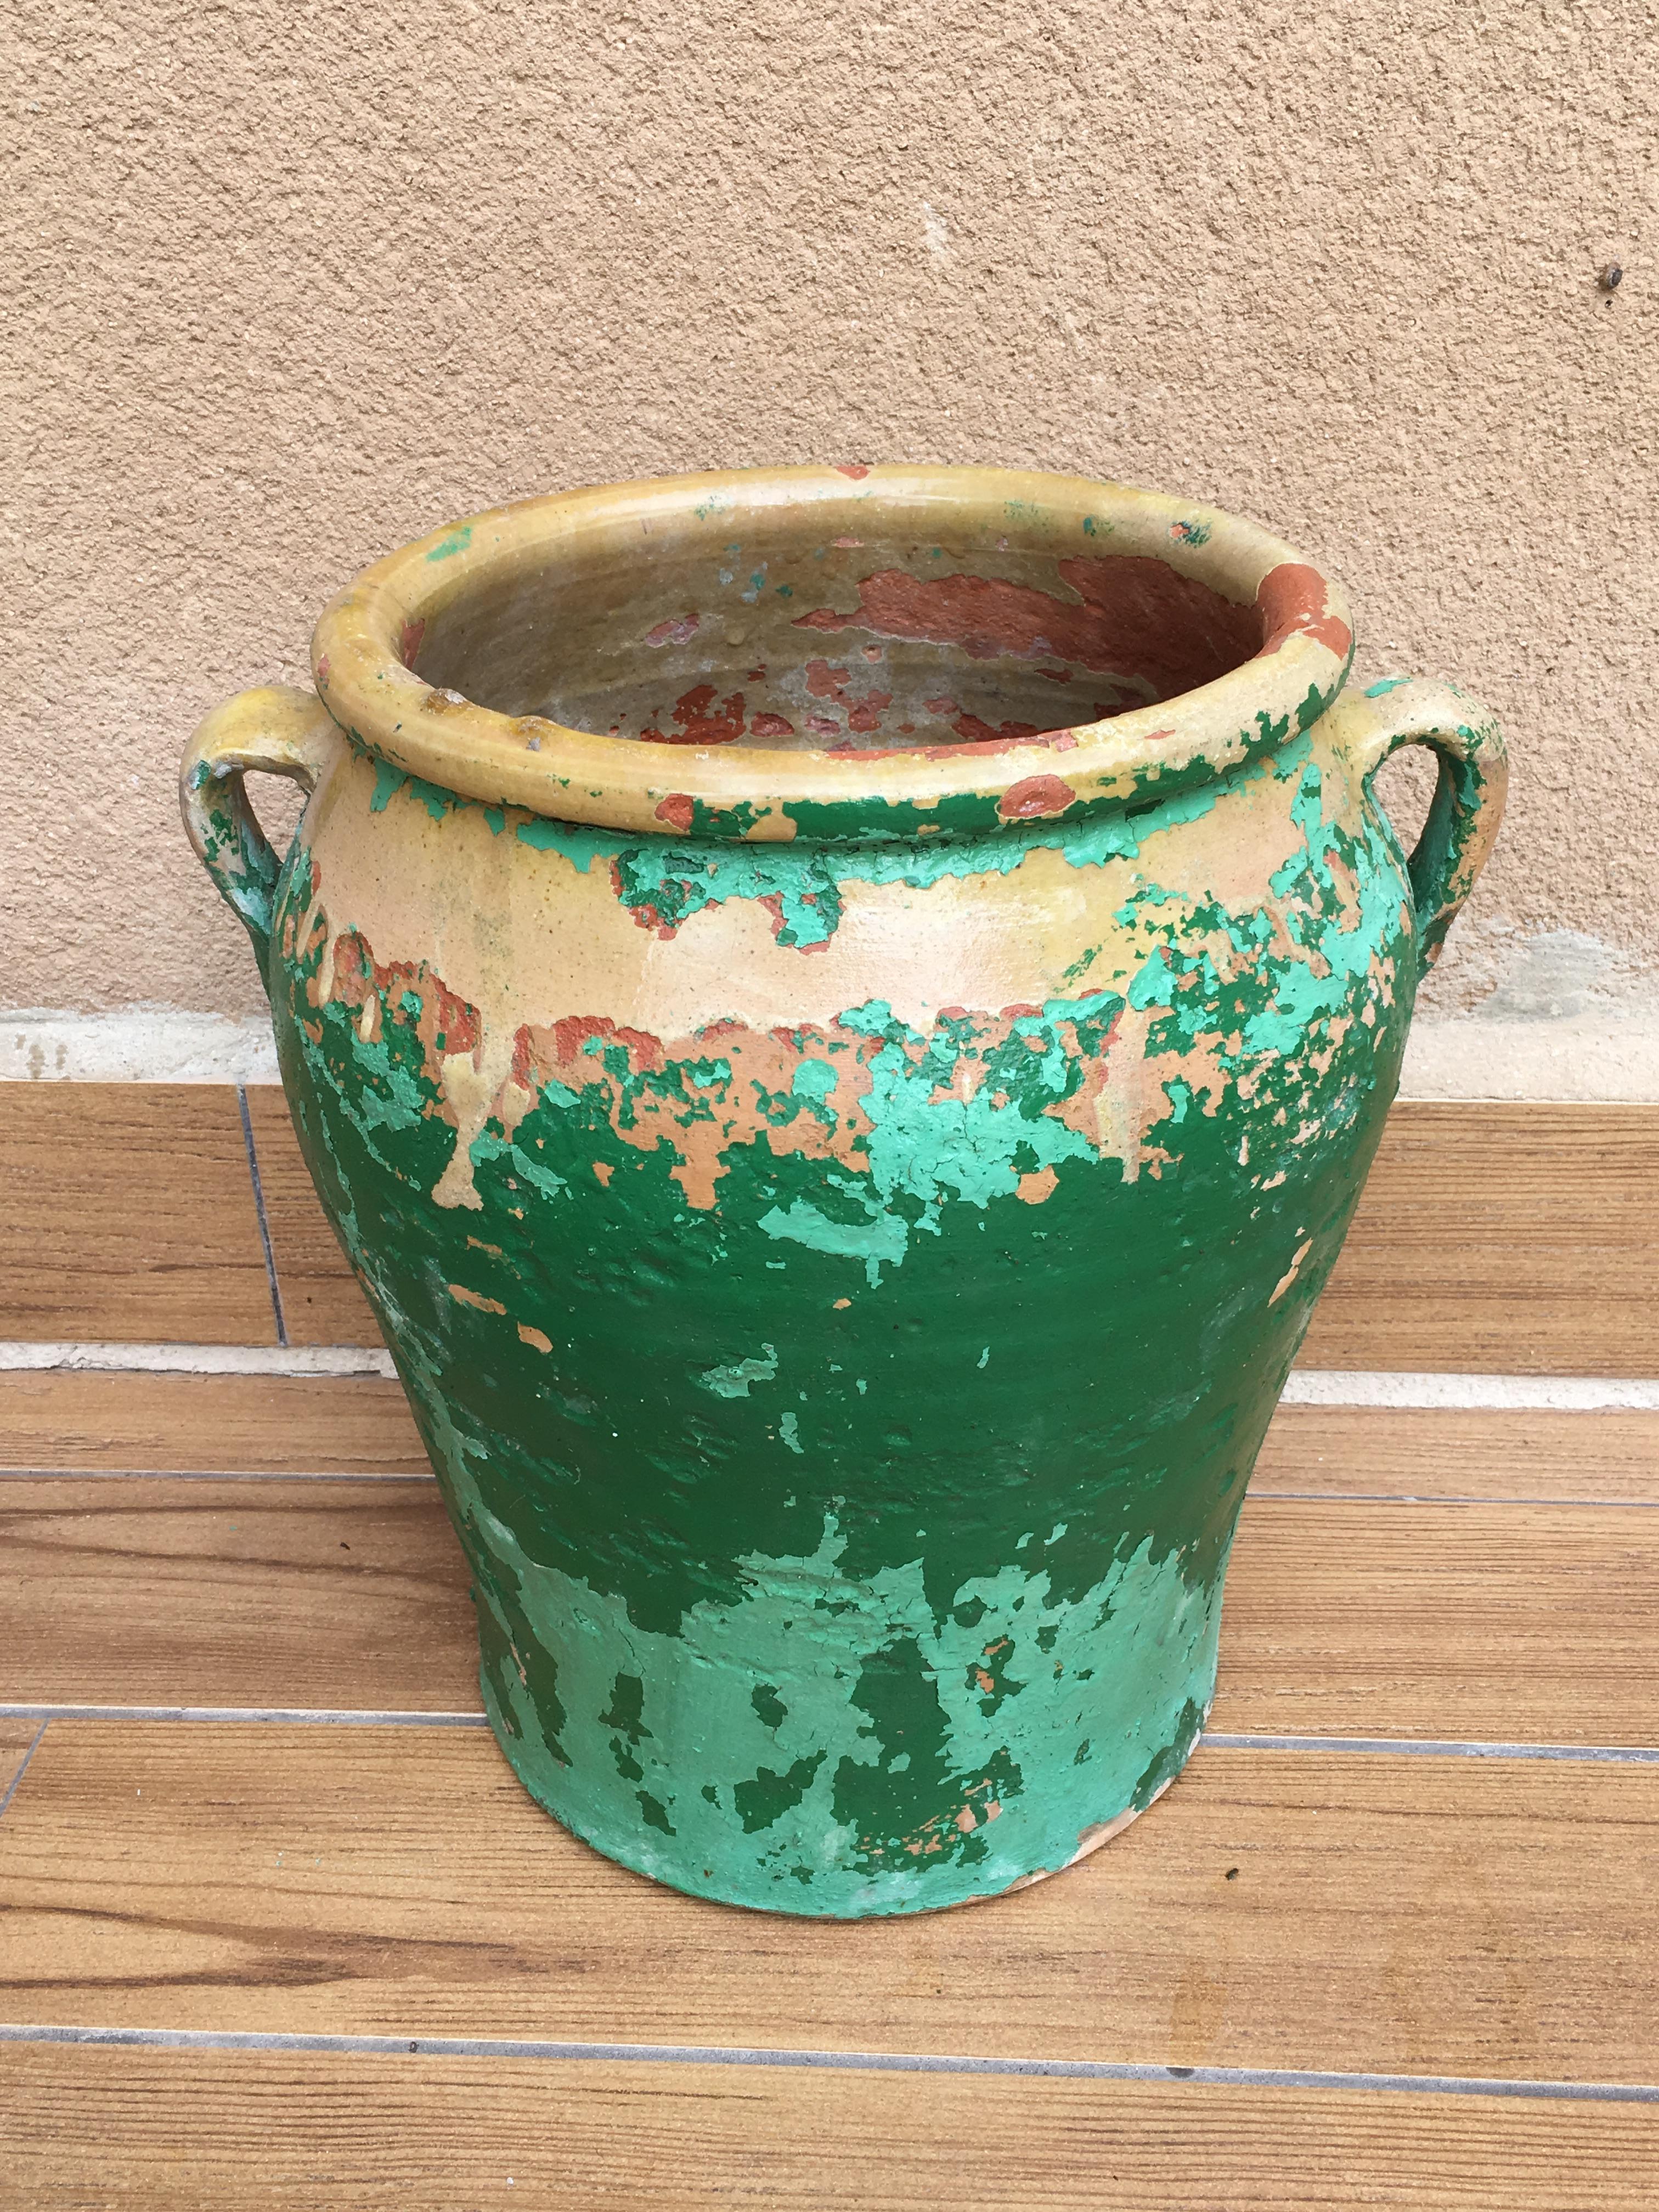 A jar produced in the South of France, circa 19th century. Terra cotta with original patina. Originally used as storage containers for olives.
We love the intense green glaze planter. Of medium size, you can potted up with herbs or lettuces for an